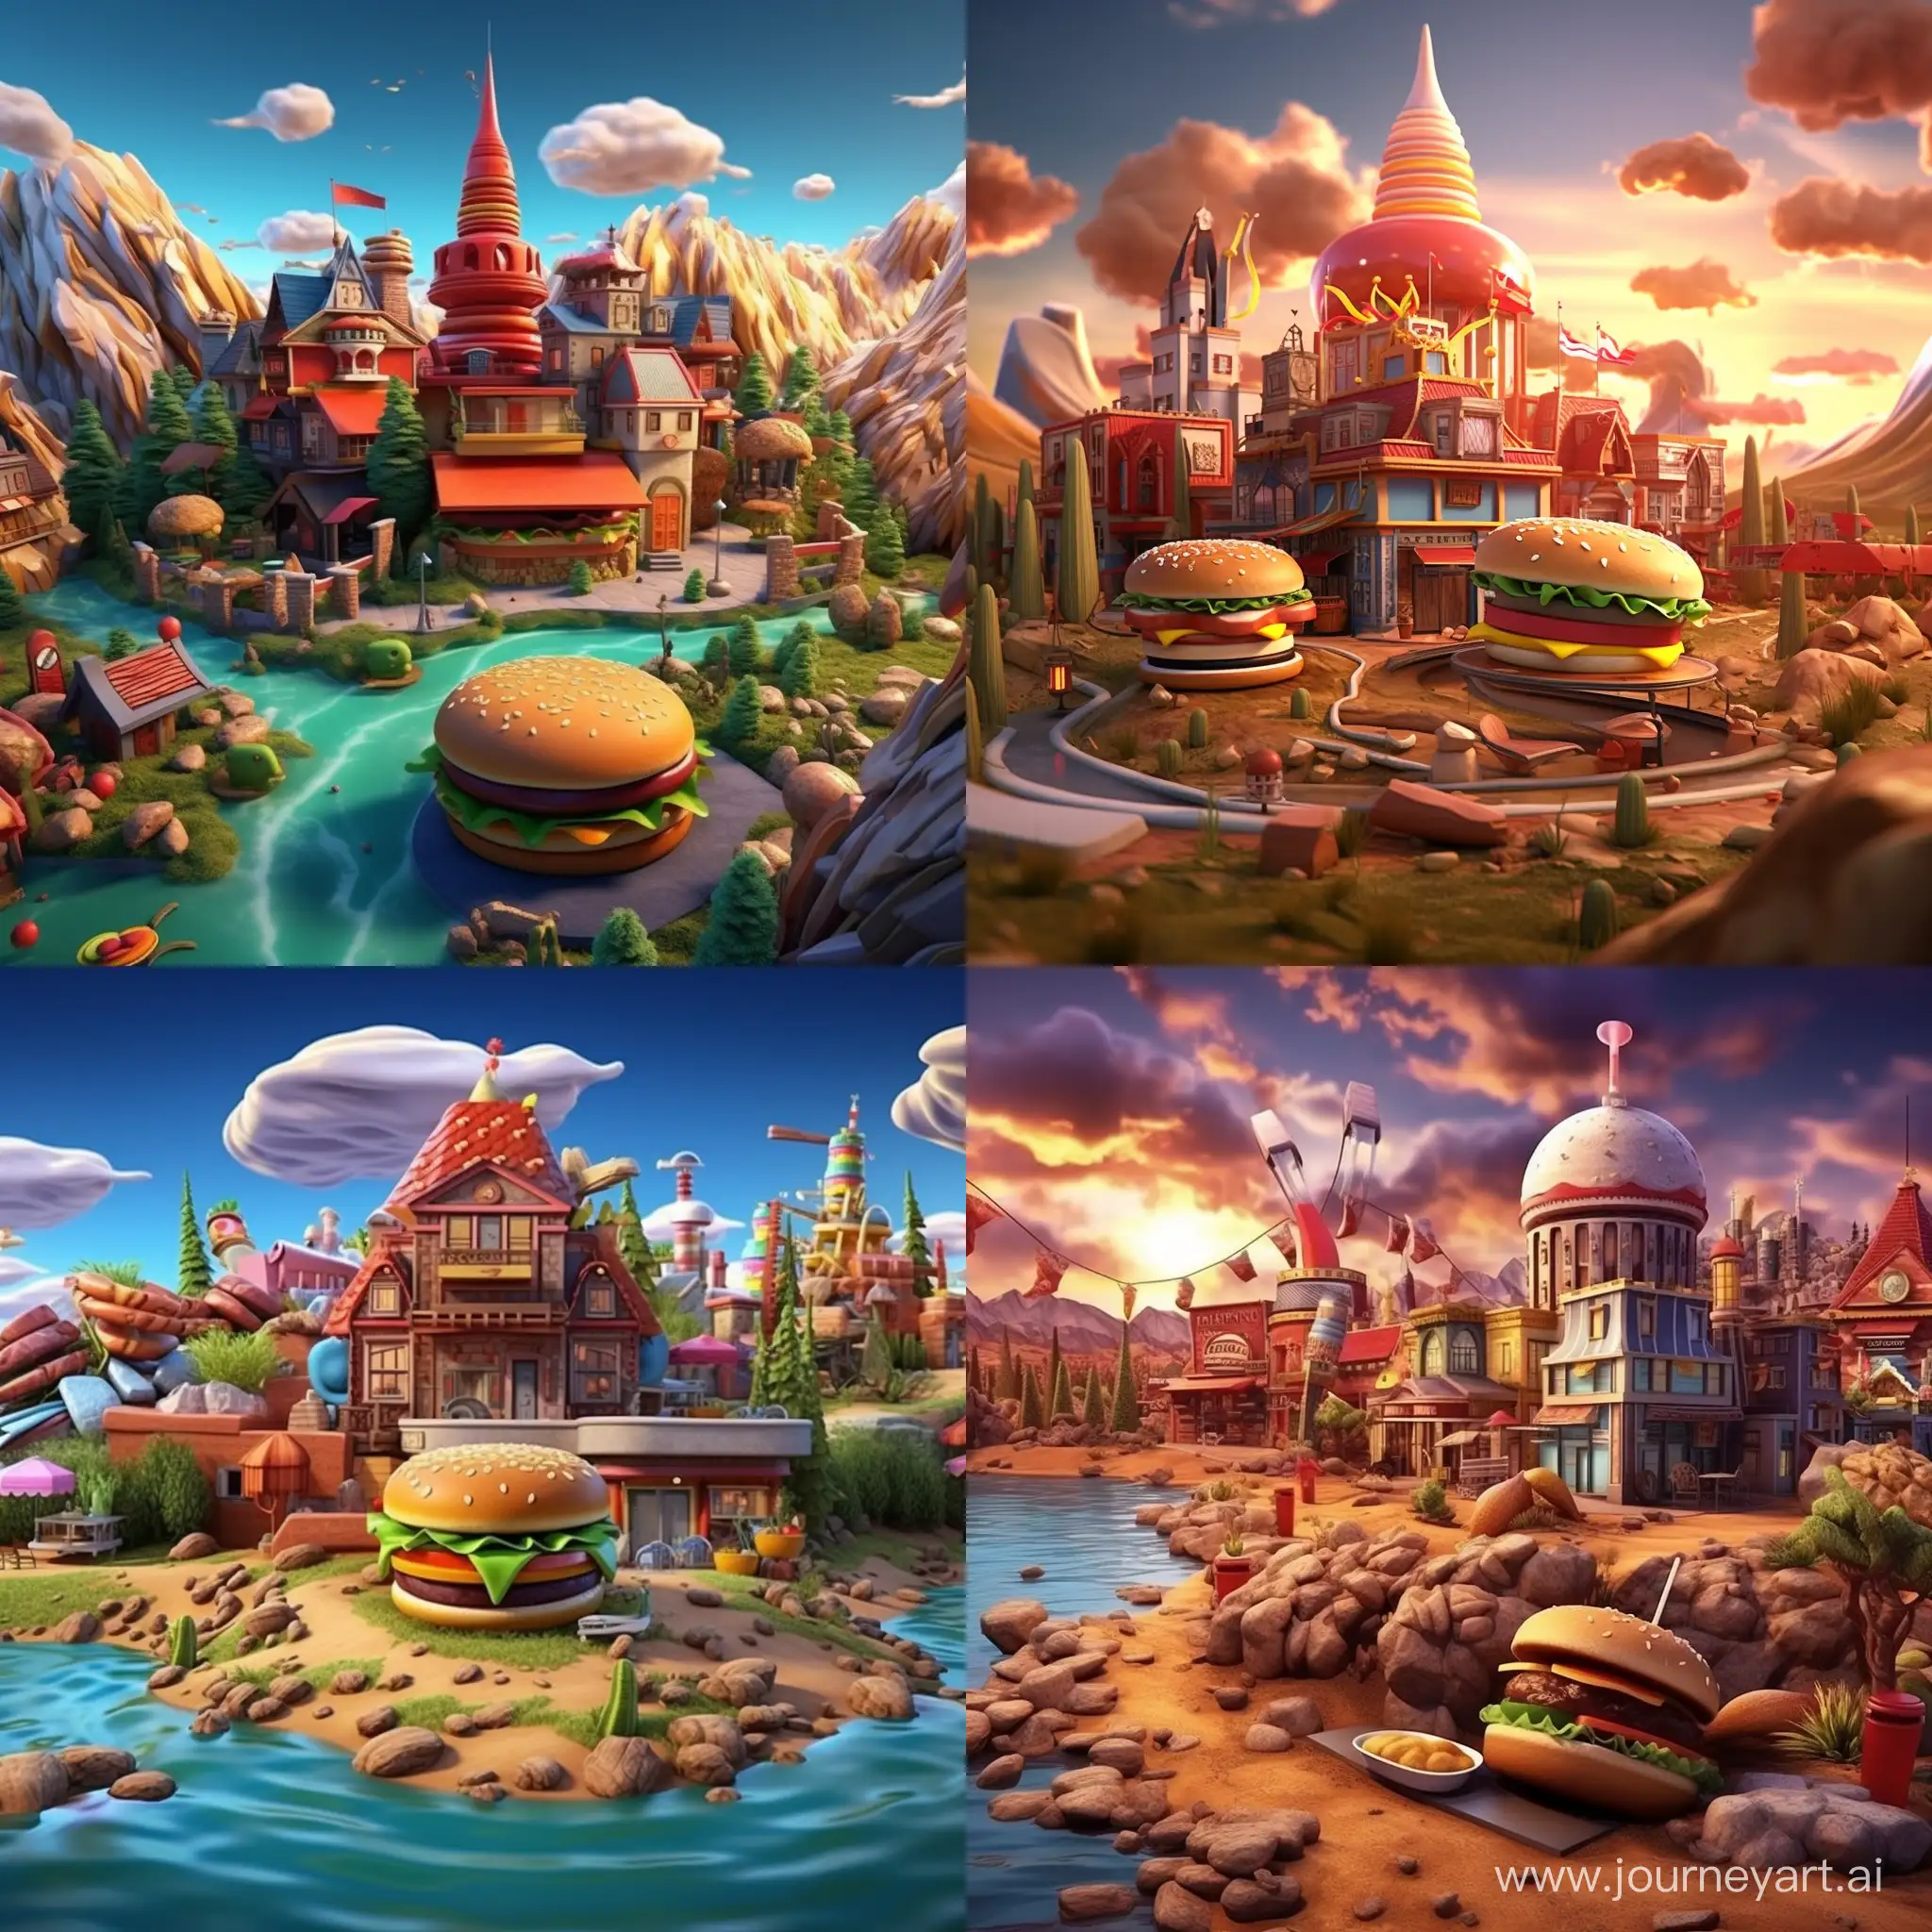 Fast-Food-Wonderland-3D-Animation-of-Burger-Houses-Coke-Rivers-and-Pizza-Fields